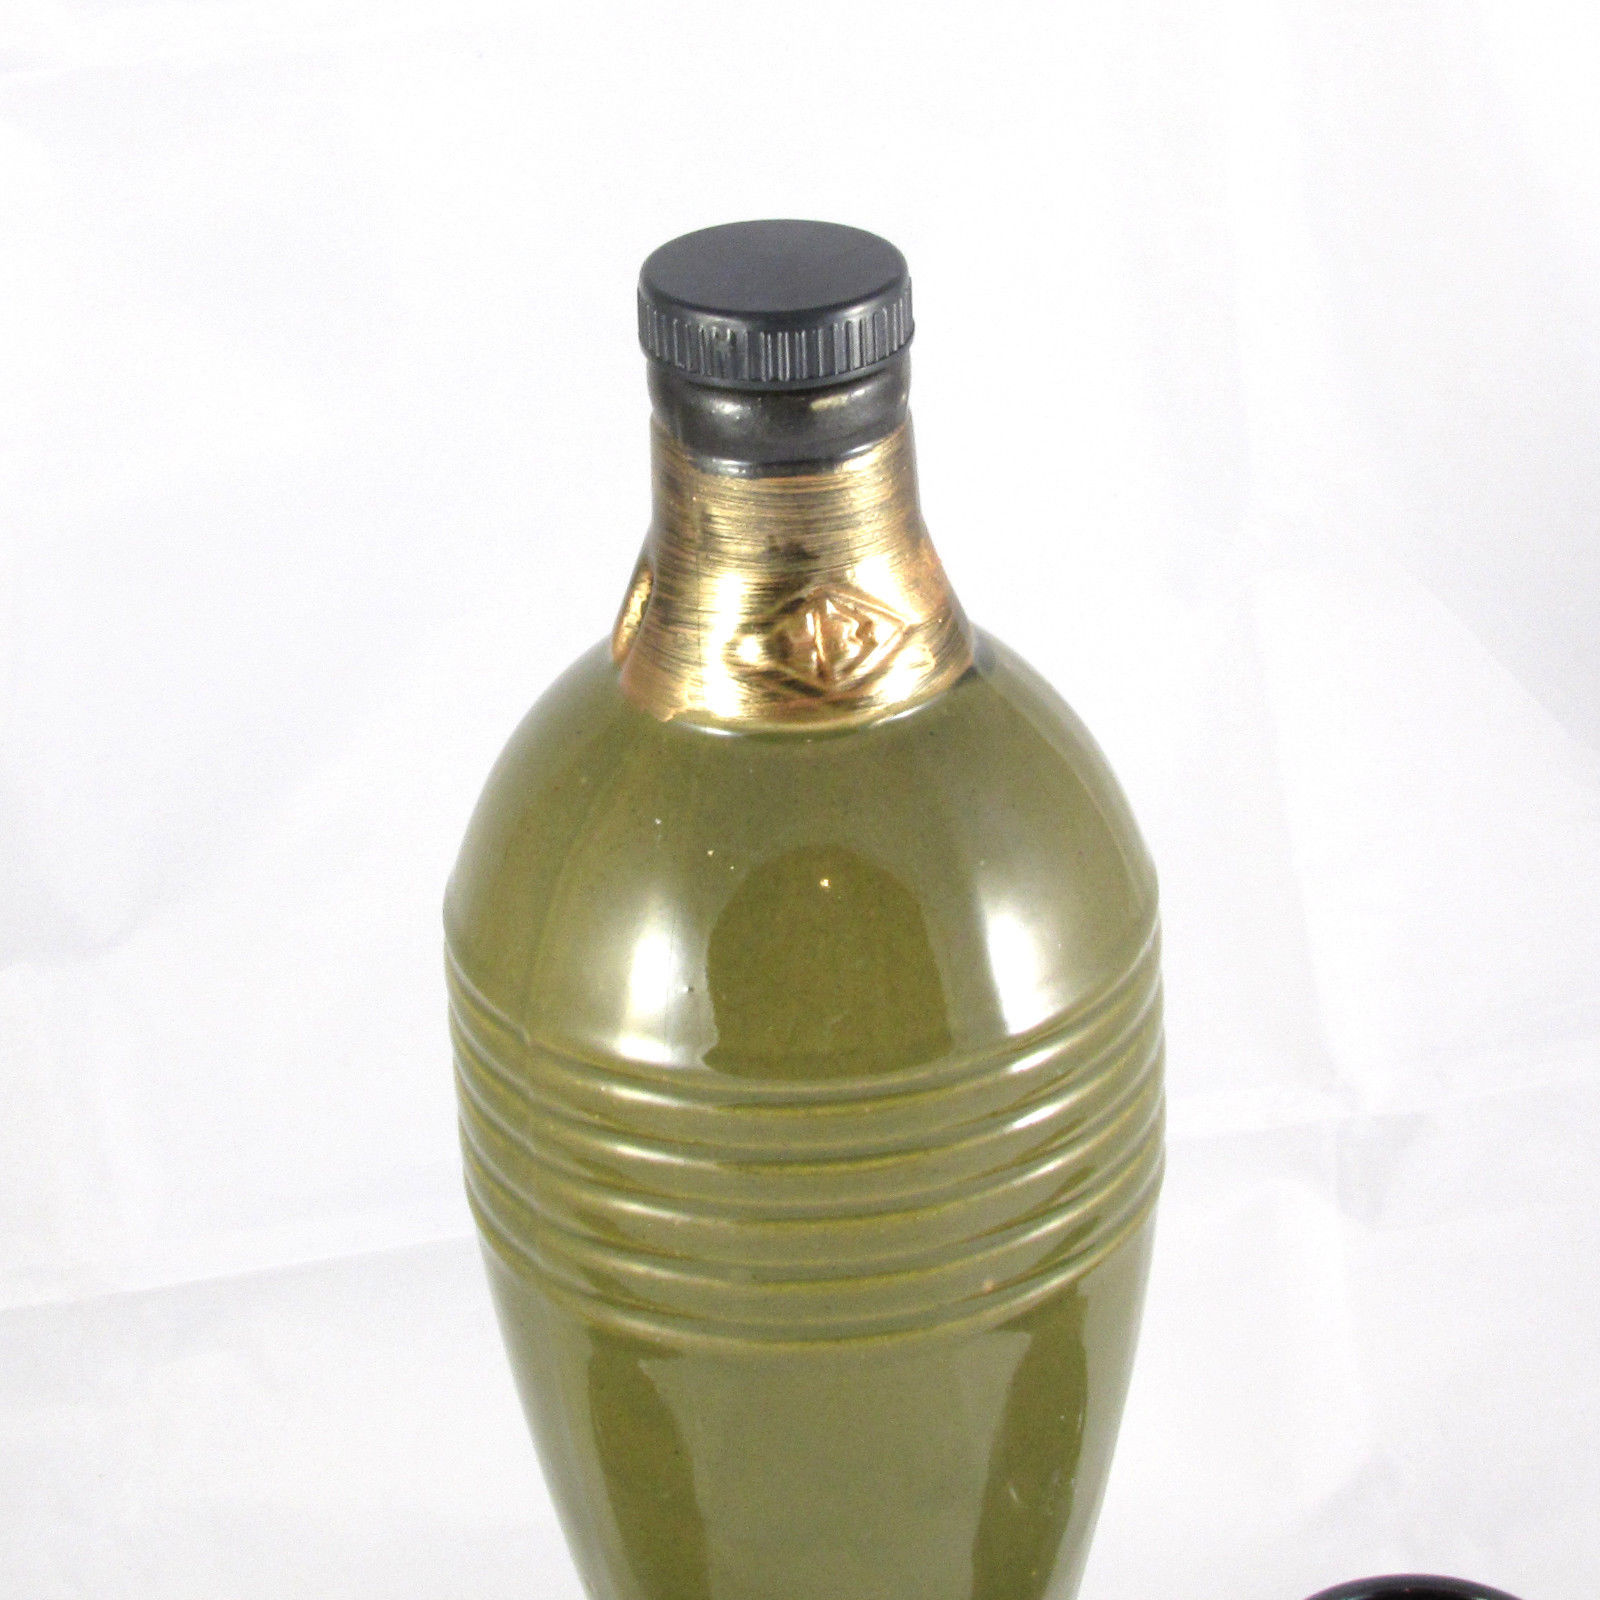 Details about   CERAMIC MILITARY STYLE DECANTER  "MINE MOH-50 ROCKET BOMB" FOR WHISKEY VODKA 